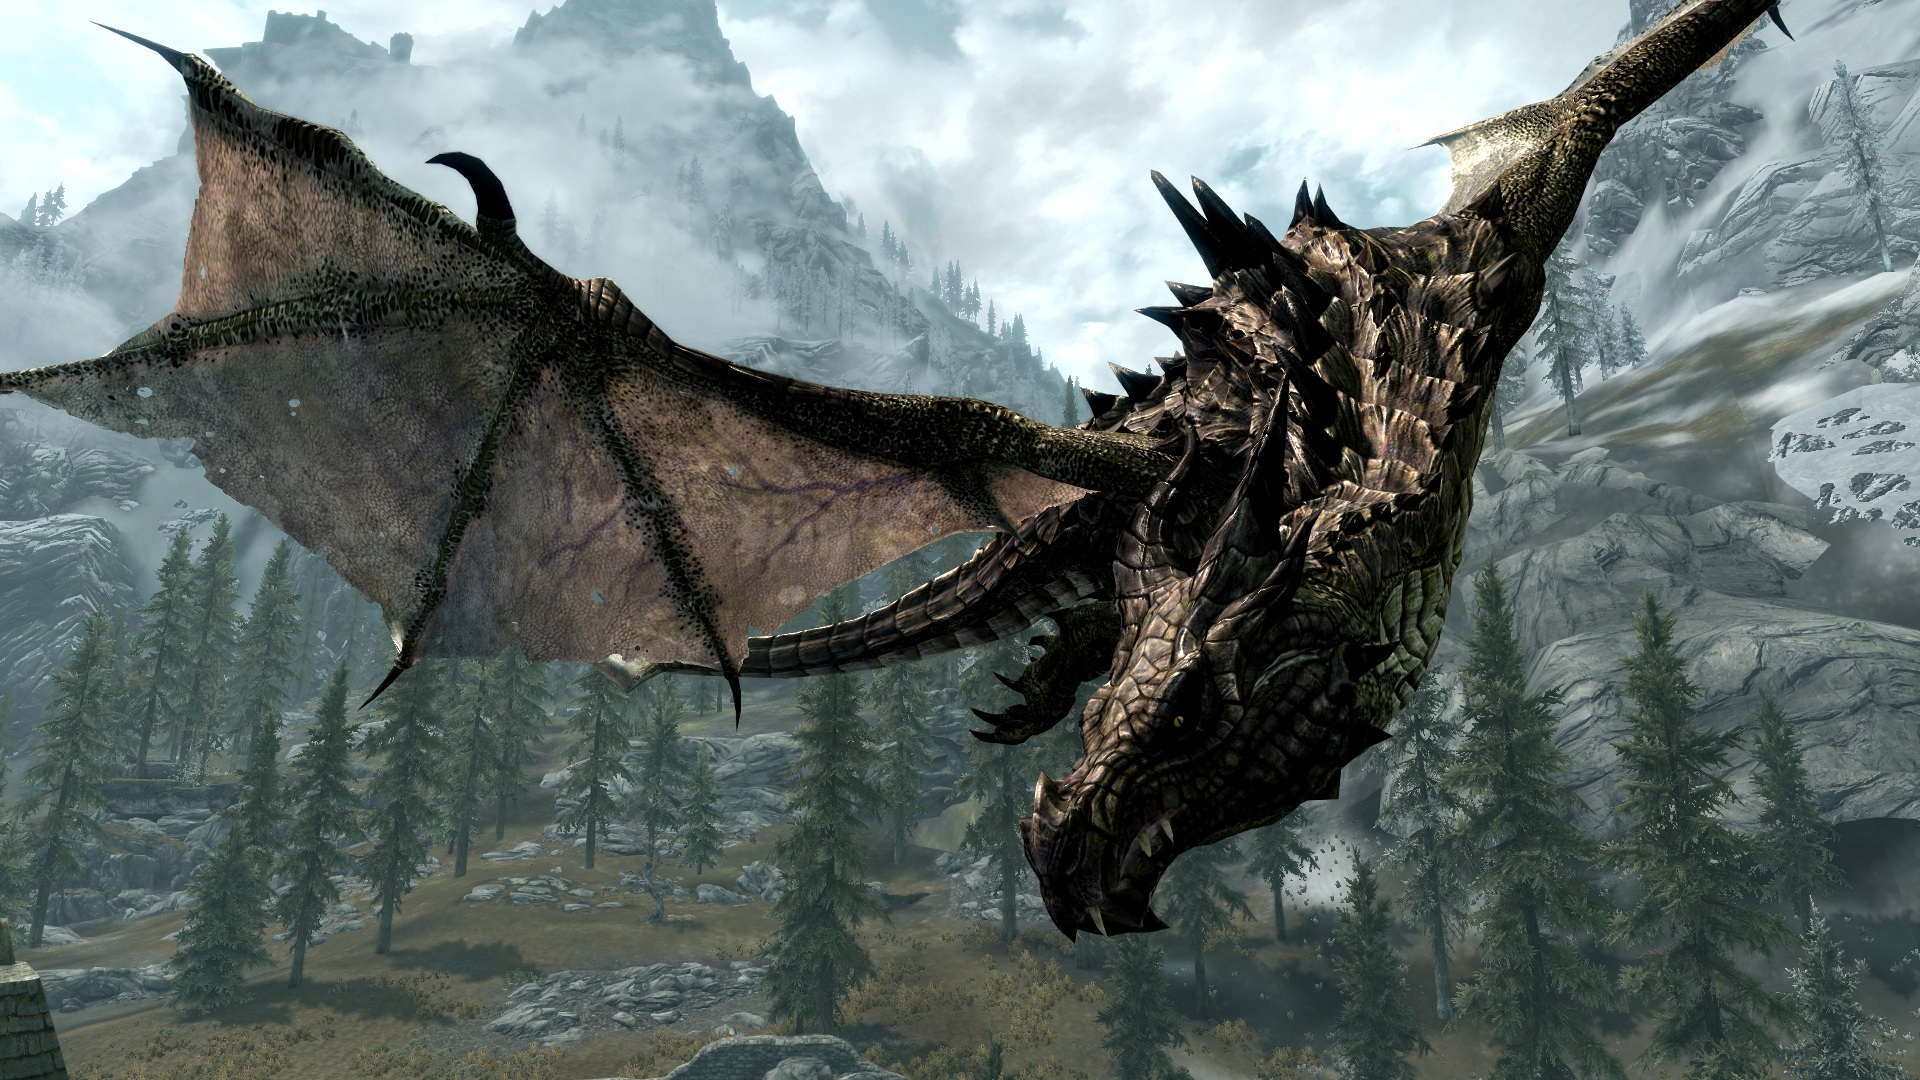 Skyrim mods have been downloaded over 6 billion times the biggest modding site – will anything ever come close to the RPG's stunning legacy?